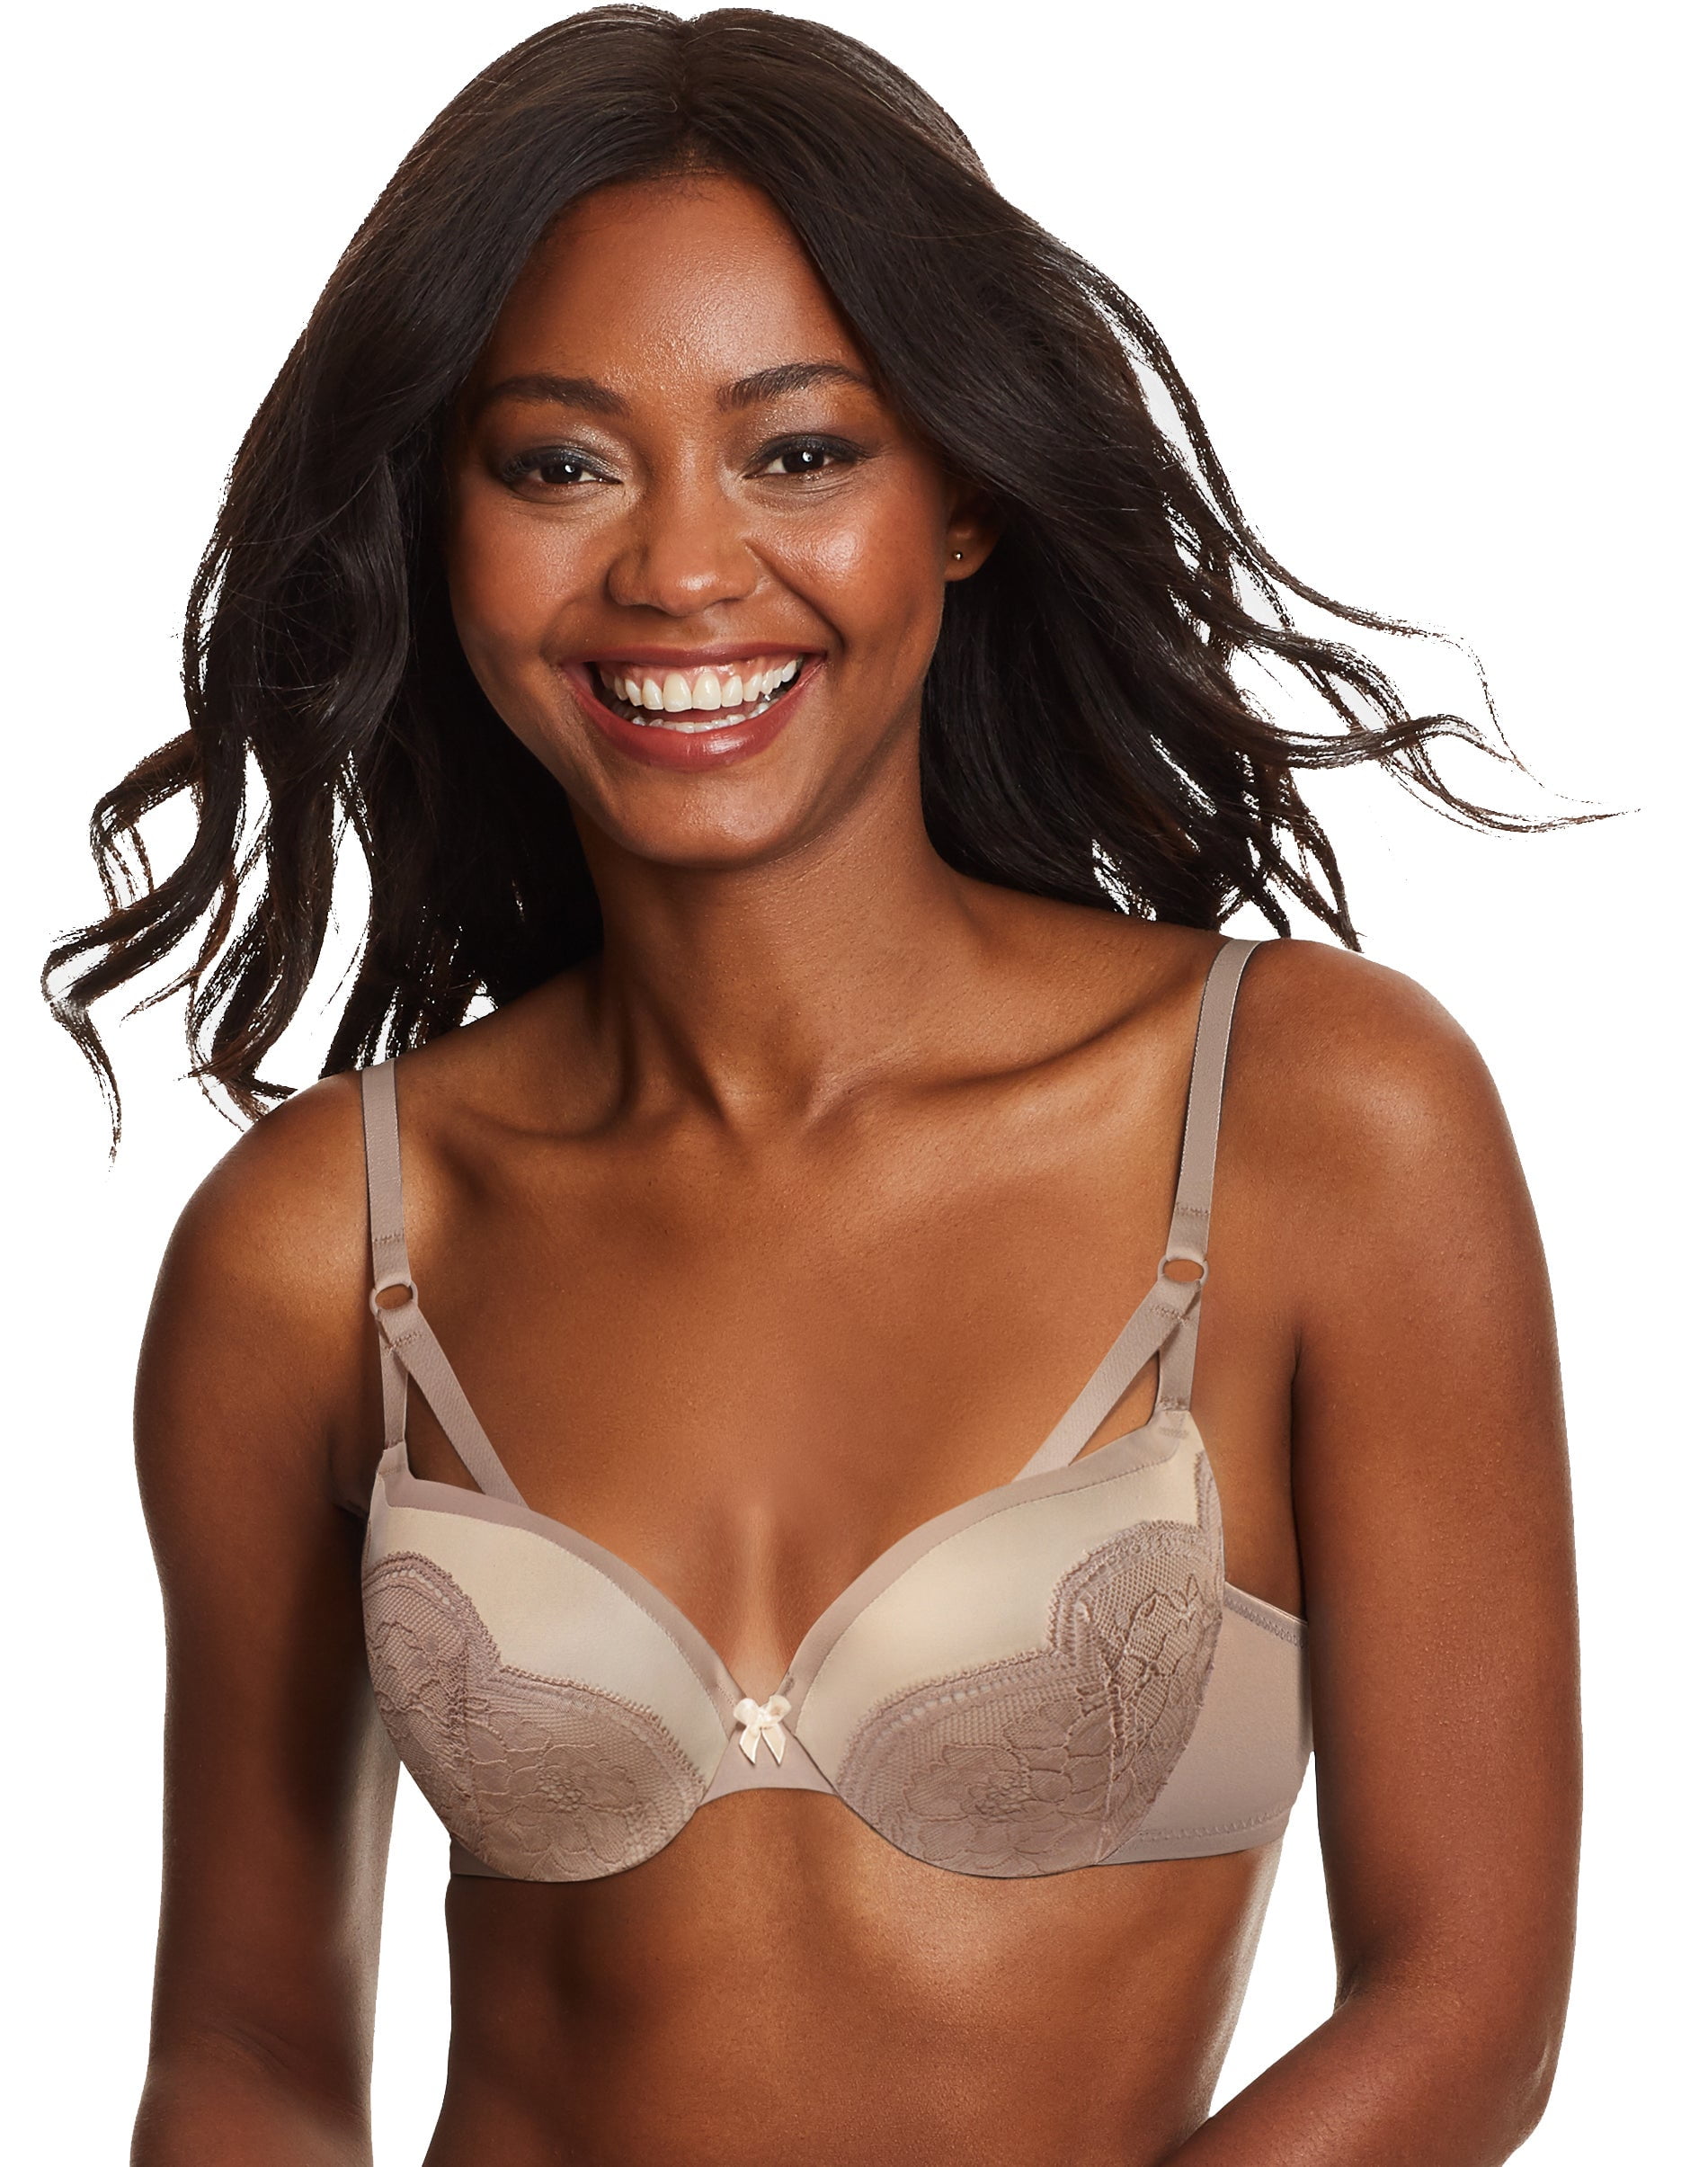 The Bra Box - Get the “Push-up” you need with this Maidenform Bra Box set  💜 Maidenform Lace Push Up Underwire Bra x 2 Size: 32C Price: $395.00 TTD  and includes two